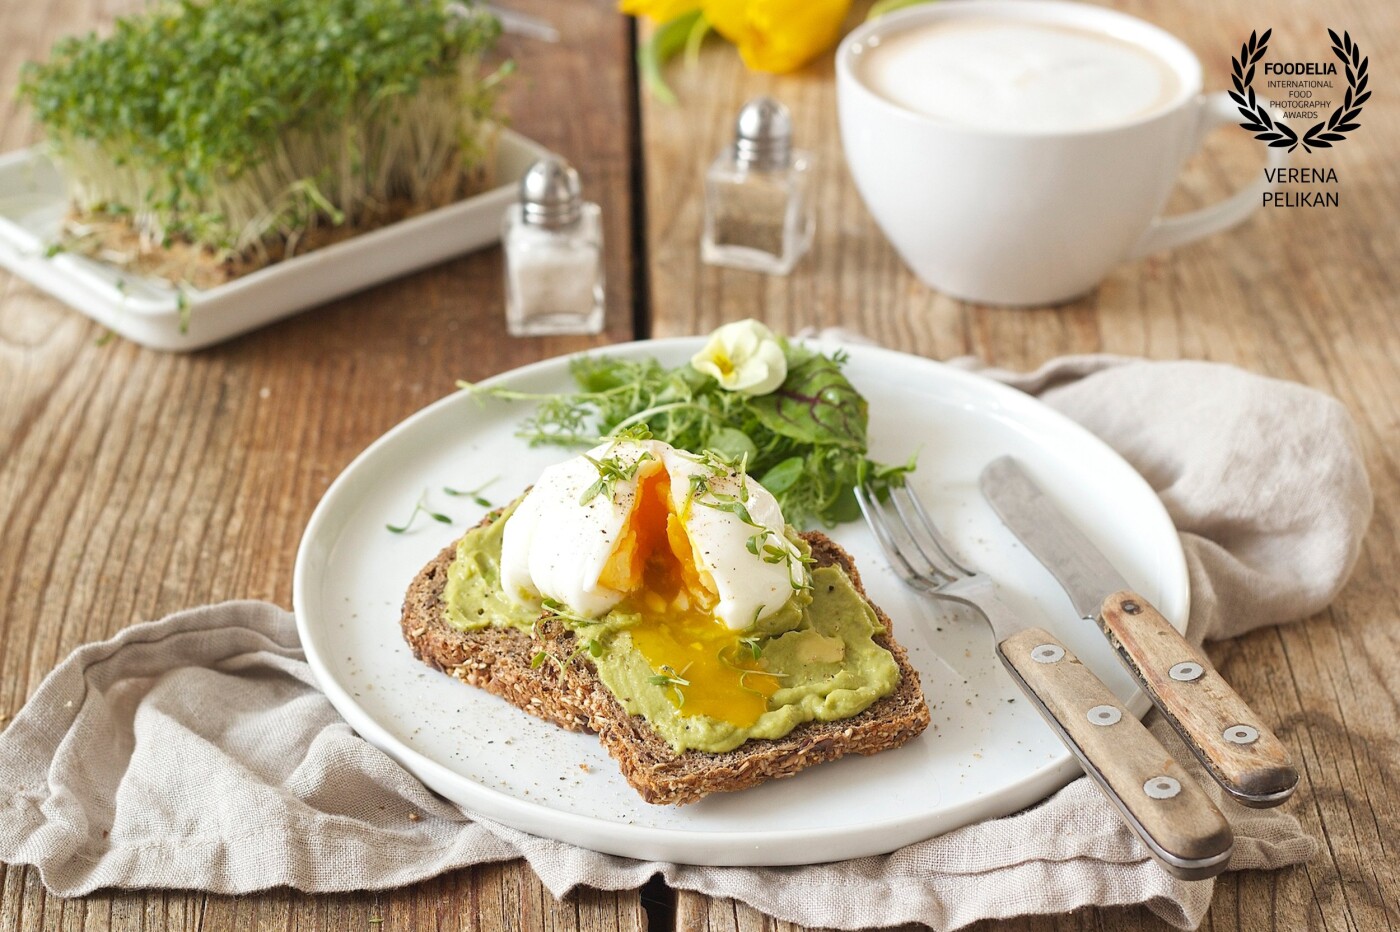 Poached egg on avocado bread - easy to make and delicious. <br />
Recipe can be found on my website https://www.sweetsandlifestyle.com/rezept/pochiertes-ei-auf-avocadobrot/